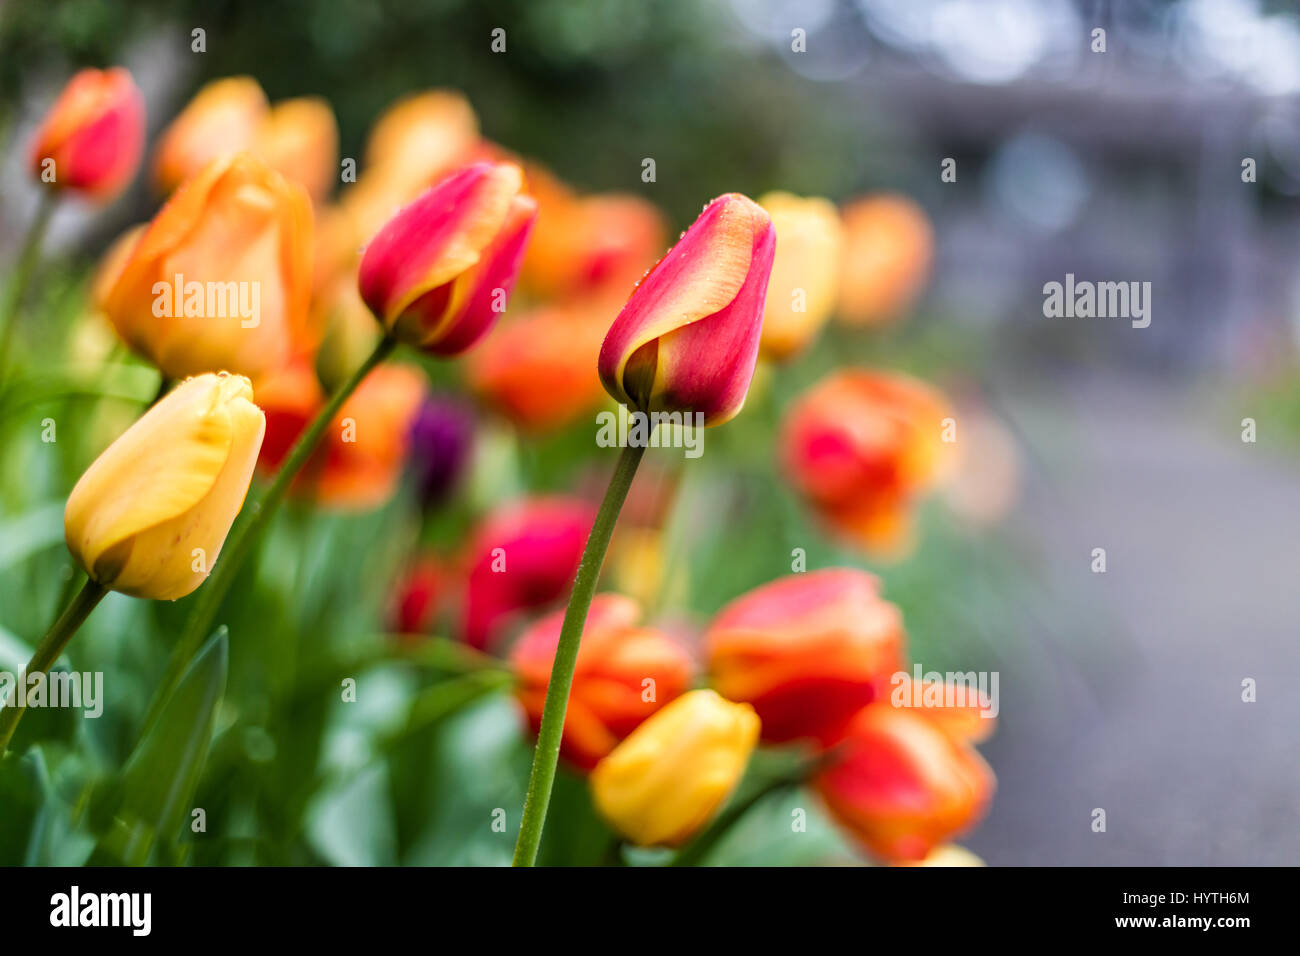 Red and yellow striped tulips in a mass planting. Stock Photo